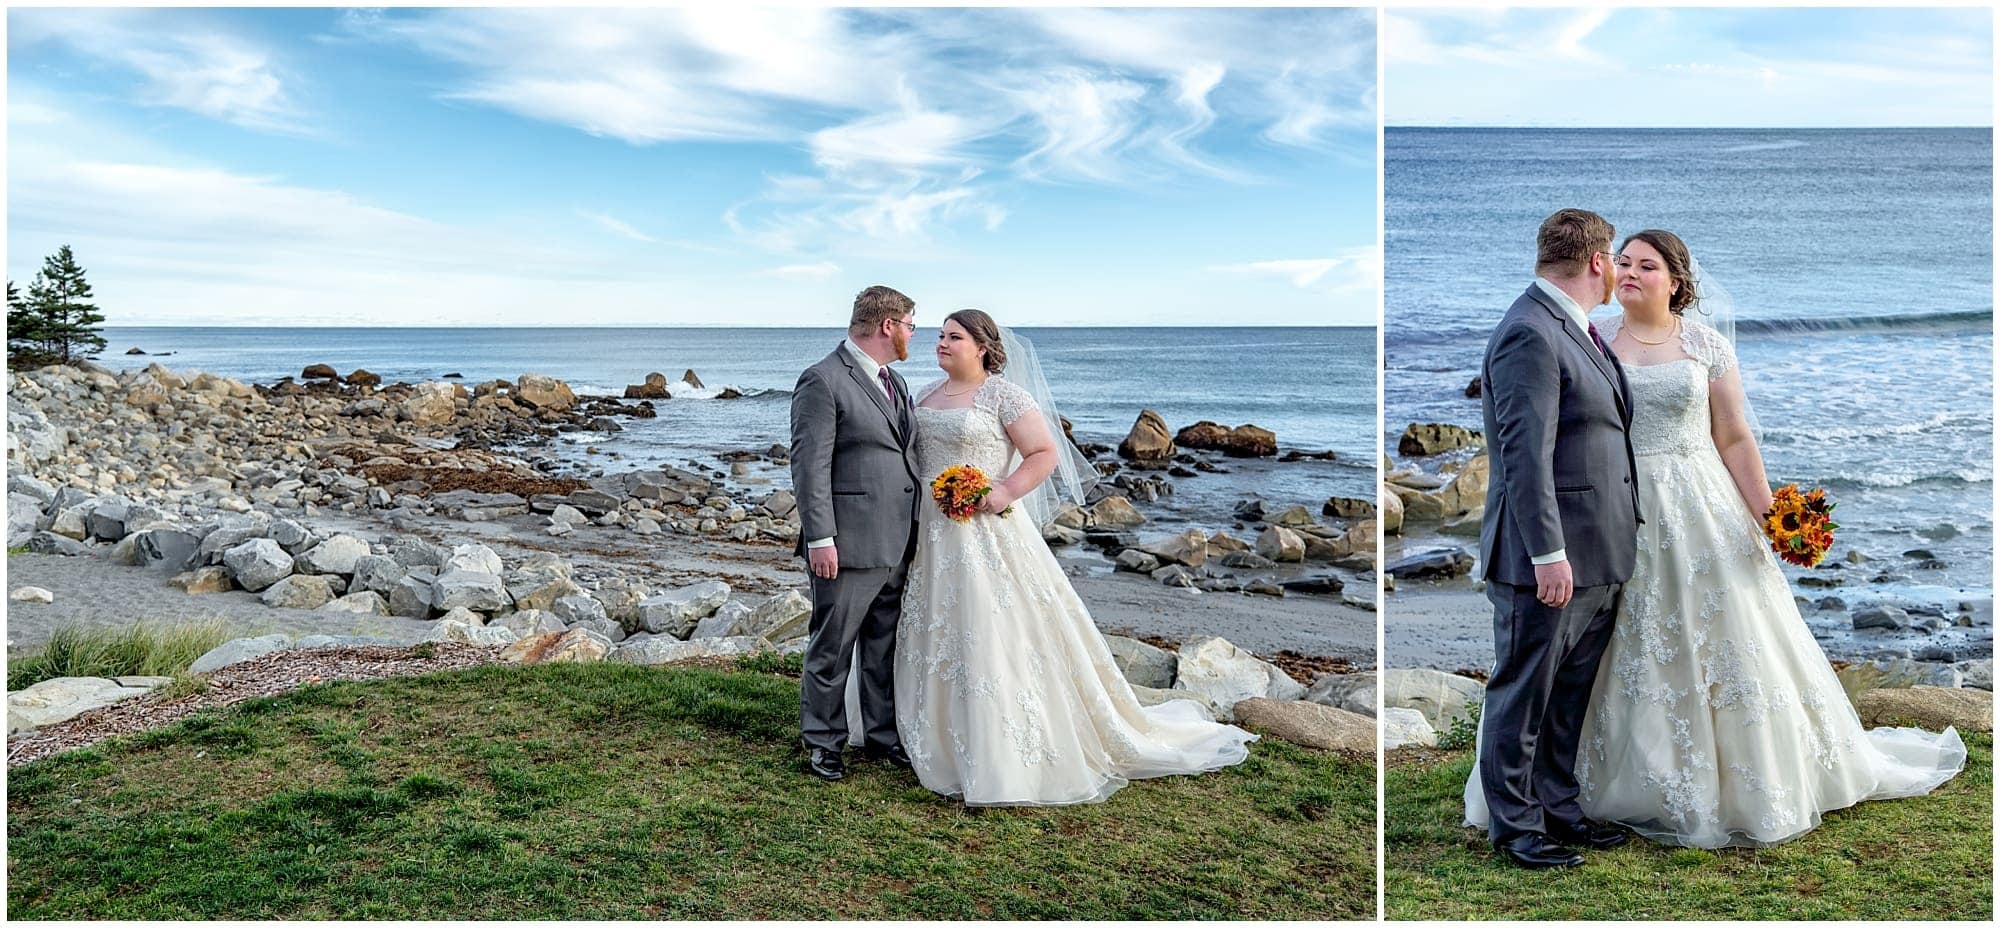 The bride and groom pose for wedding photos on the ocean at White Point.